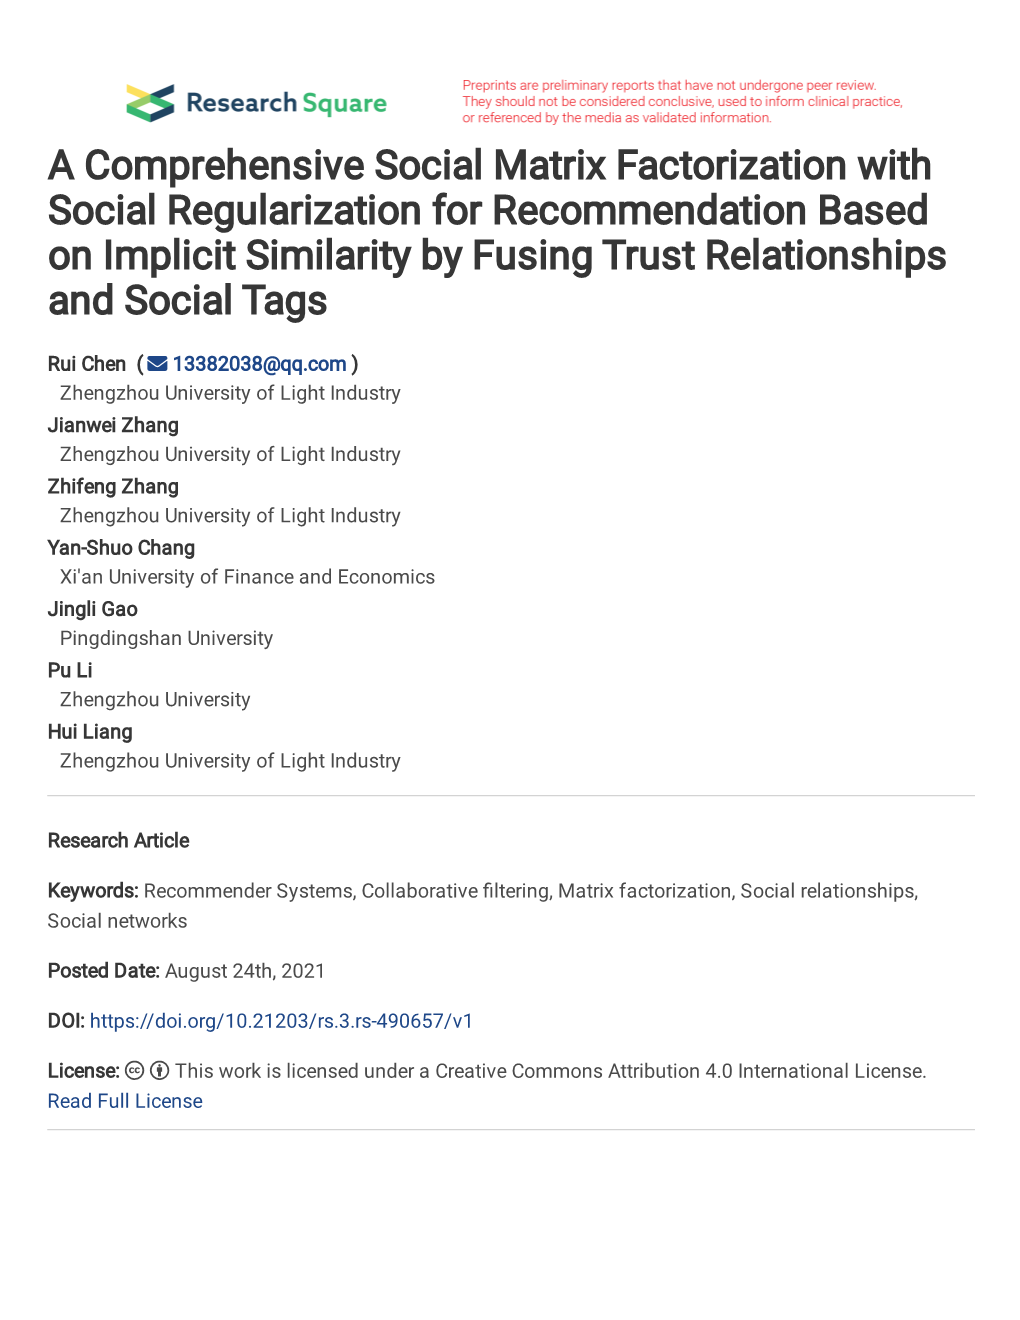 A Comprehensive Social Matrix Factorization with Social Regularization for Recommendation Based on Implicit Similarity by Fusing Trust Relationships and Social Tags